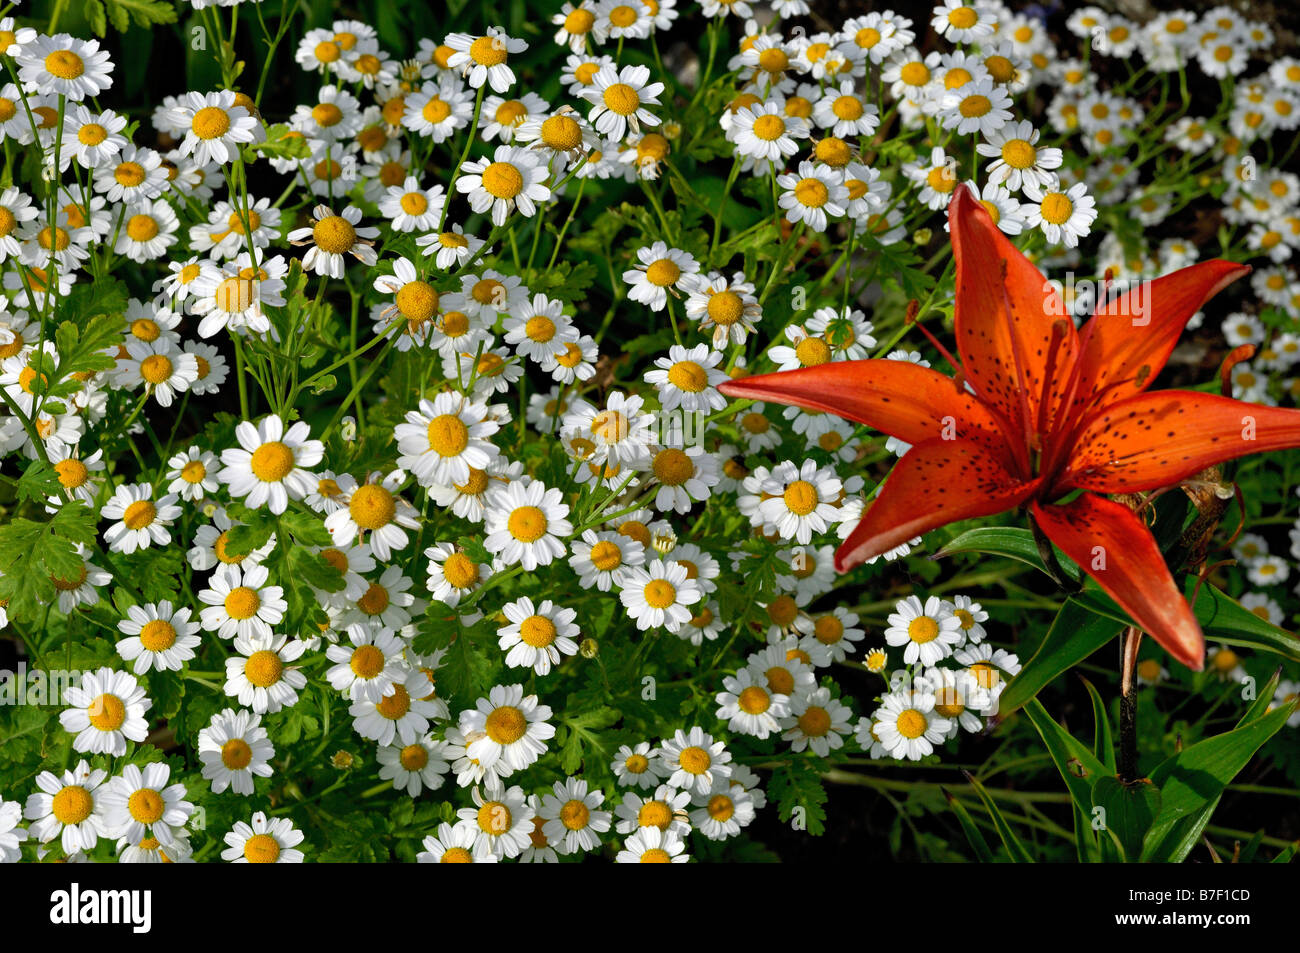 Daisies and orange lily in a herbaceous border Killin Perthshire Scotland UK Stock Photo